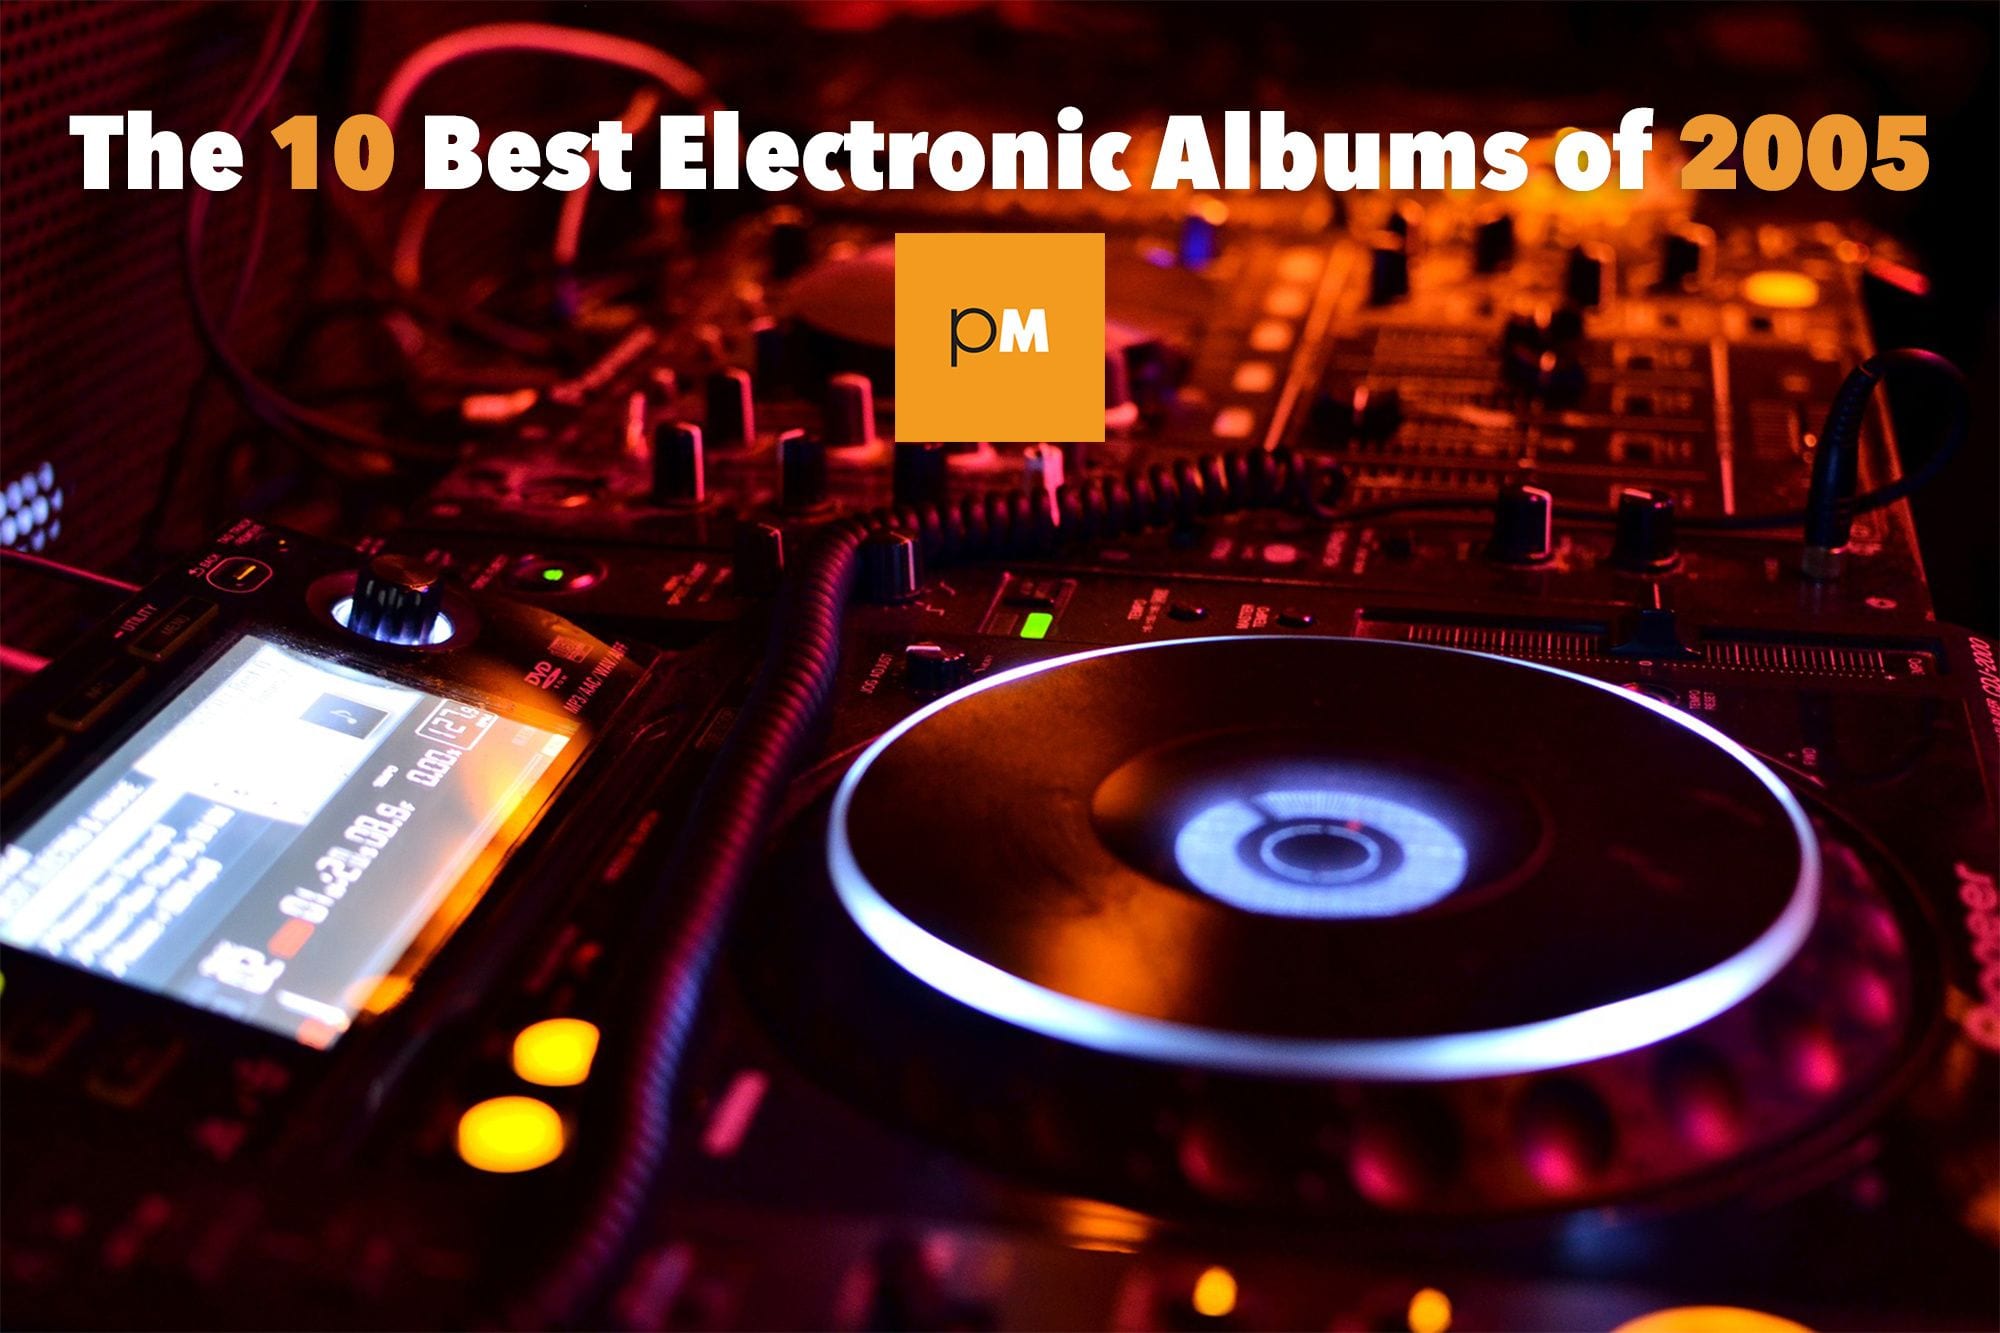 The Best 10 Electronic Albums of 2005